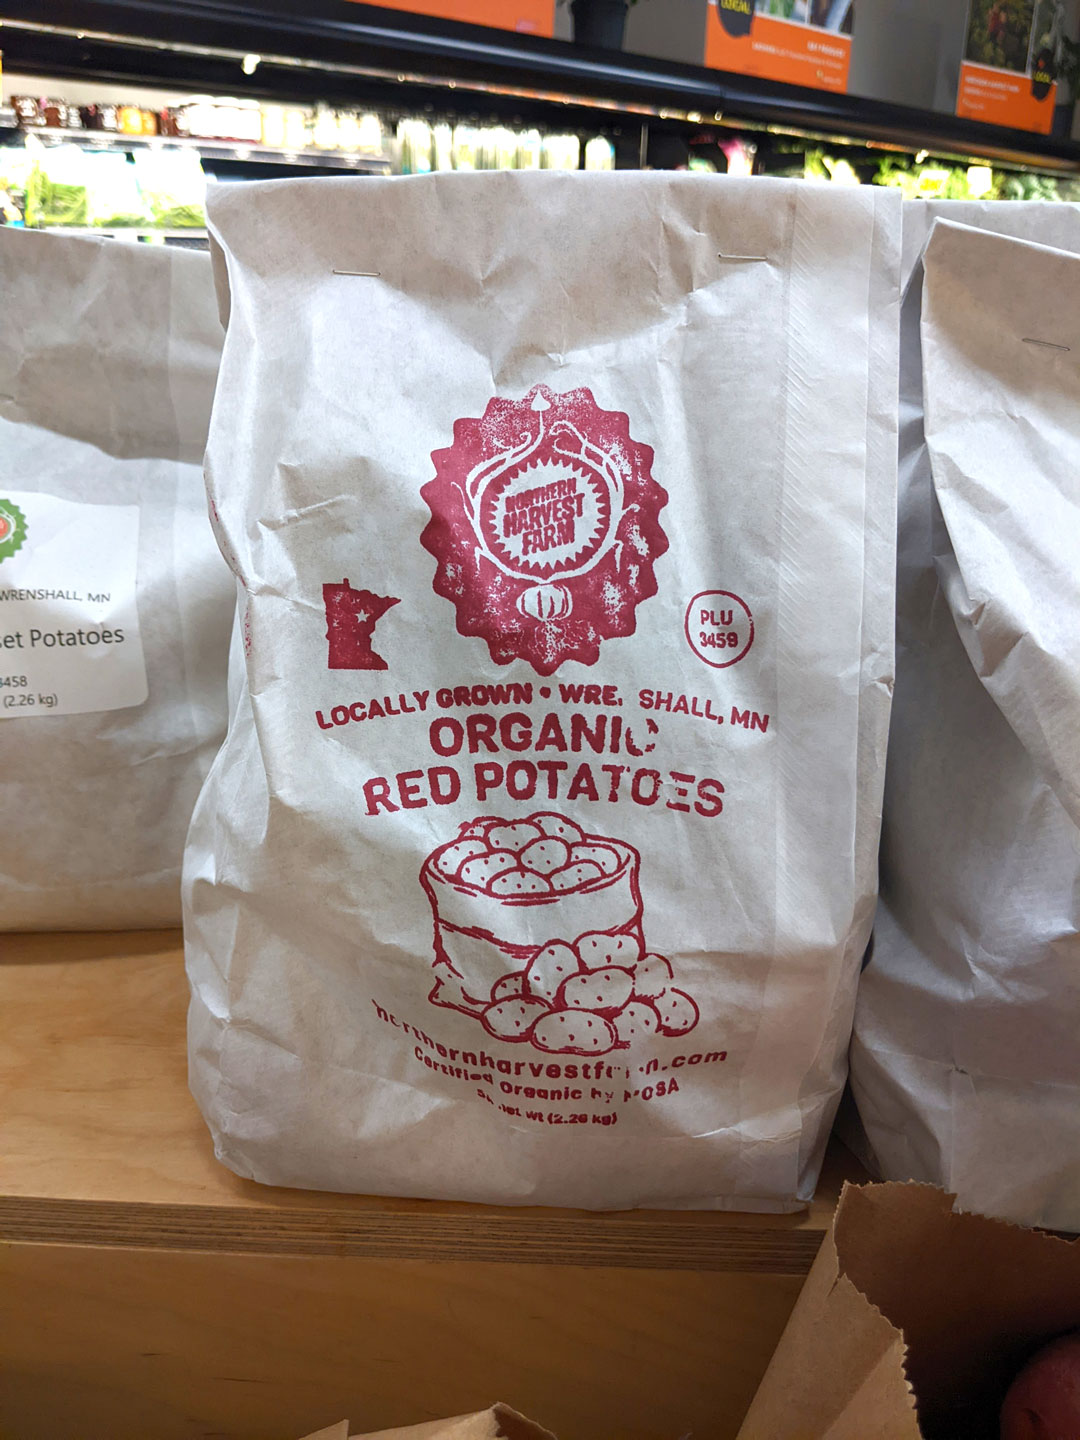 A paper bag labeled "Organic Red Potatoes" sits on a wooden surface. The bag features a red printed design with text stating "Locally Grown • WRE, Shall, MN" and "PLU 9489". The bag includes a logo with "Fresh Farm Harvest" and a website link.